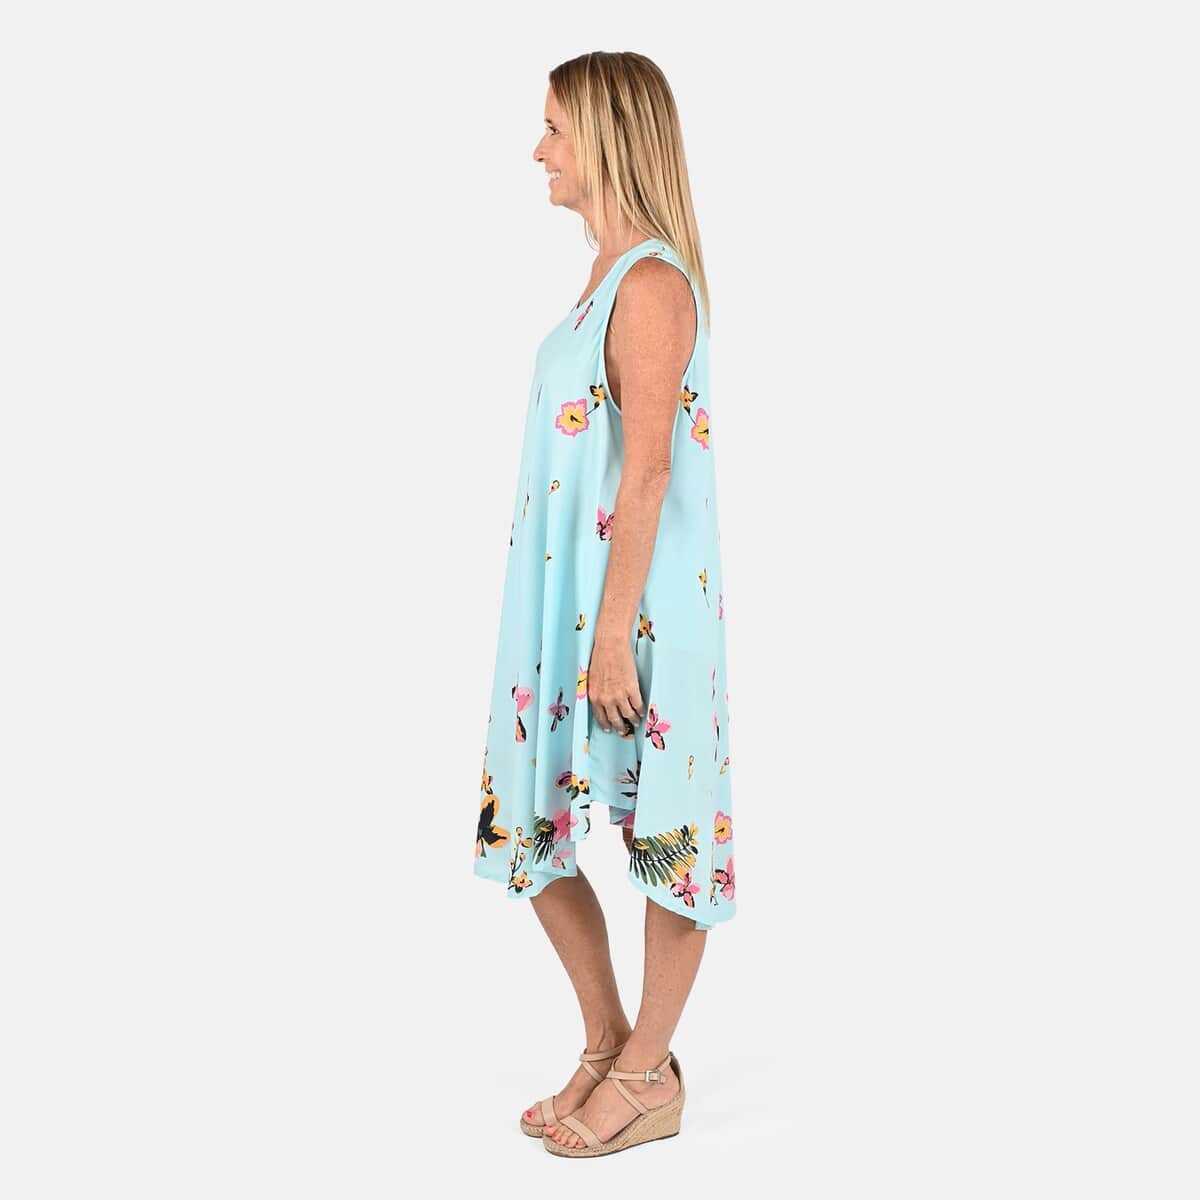 TAMSY Sky Blue Floral Screen Printed Umbrella Dress - One Size Fits Most image number 2